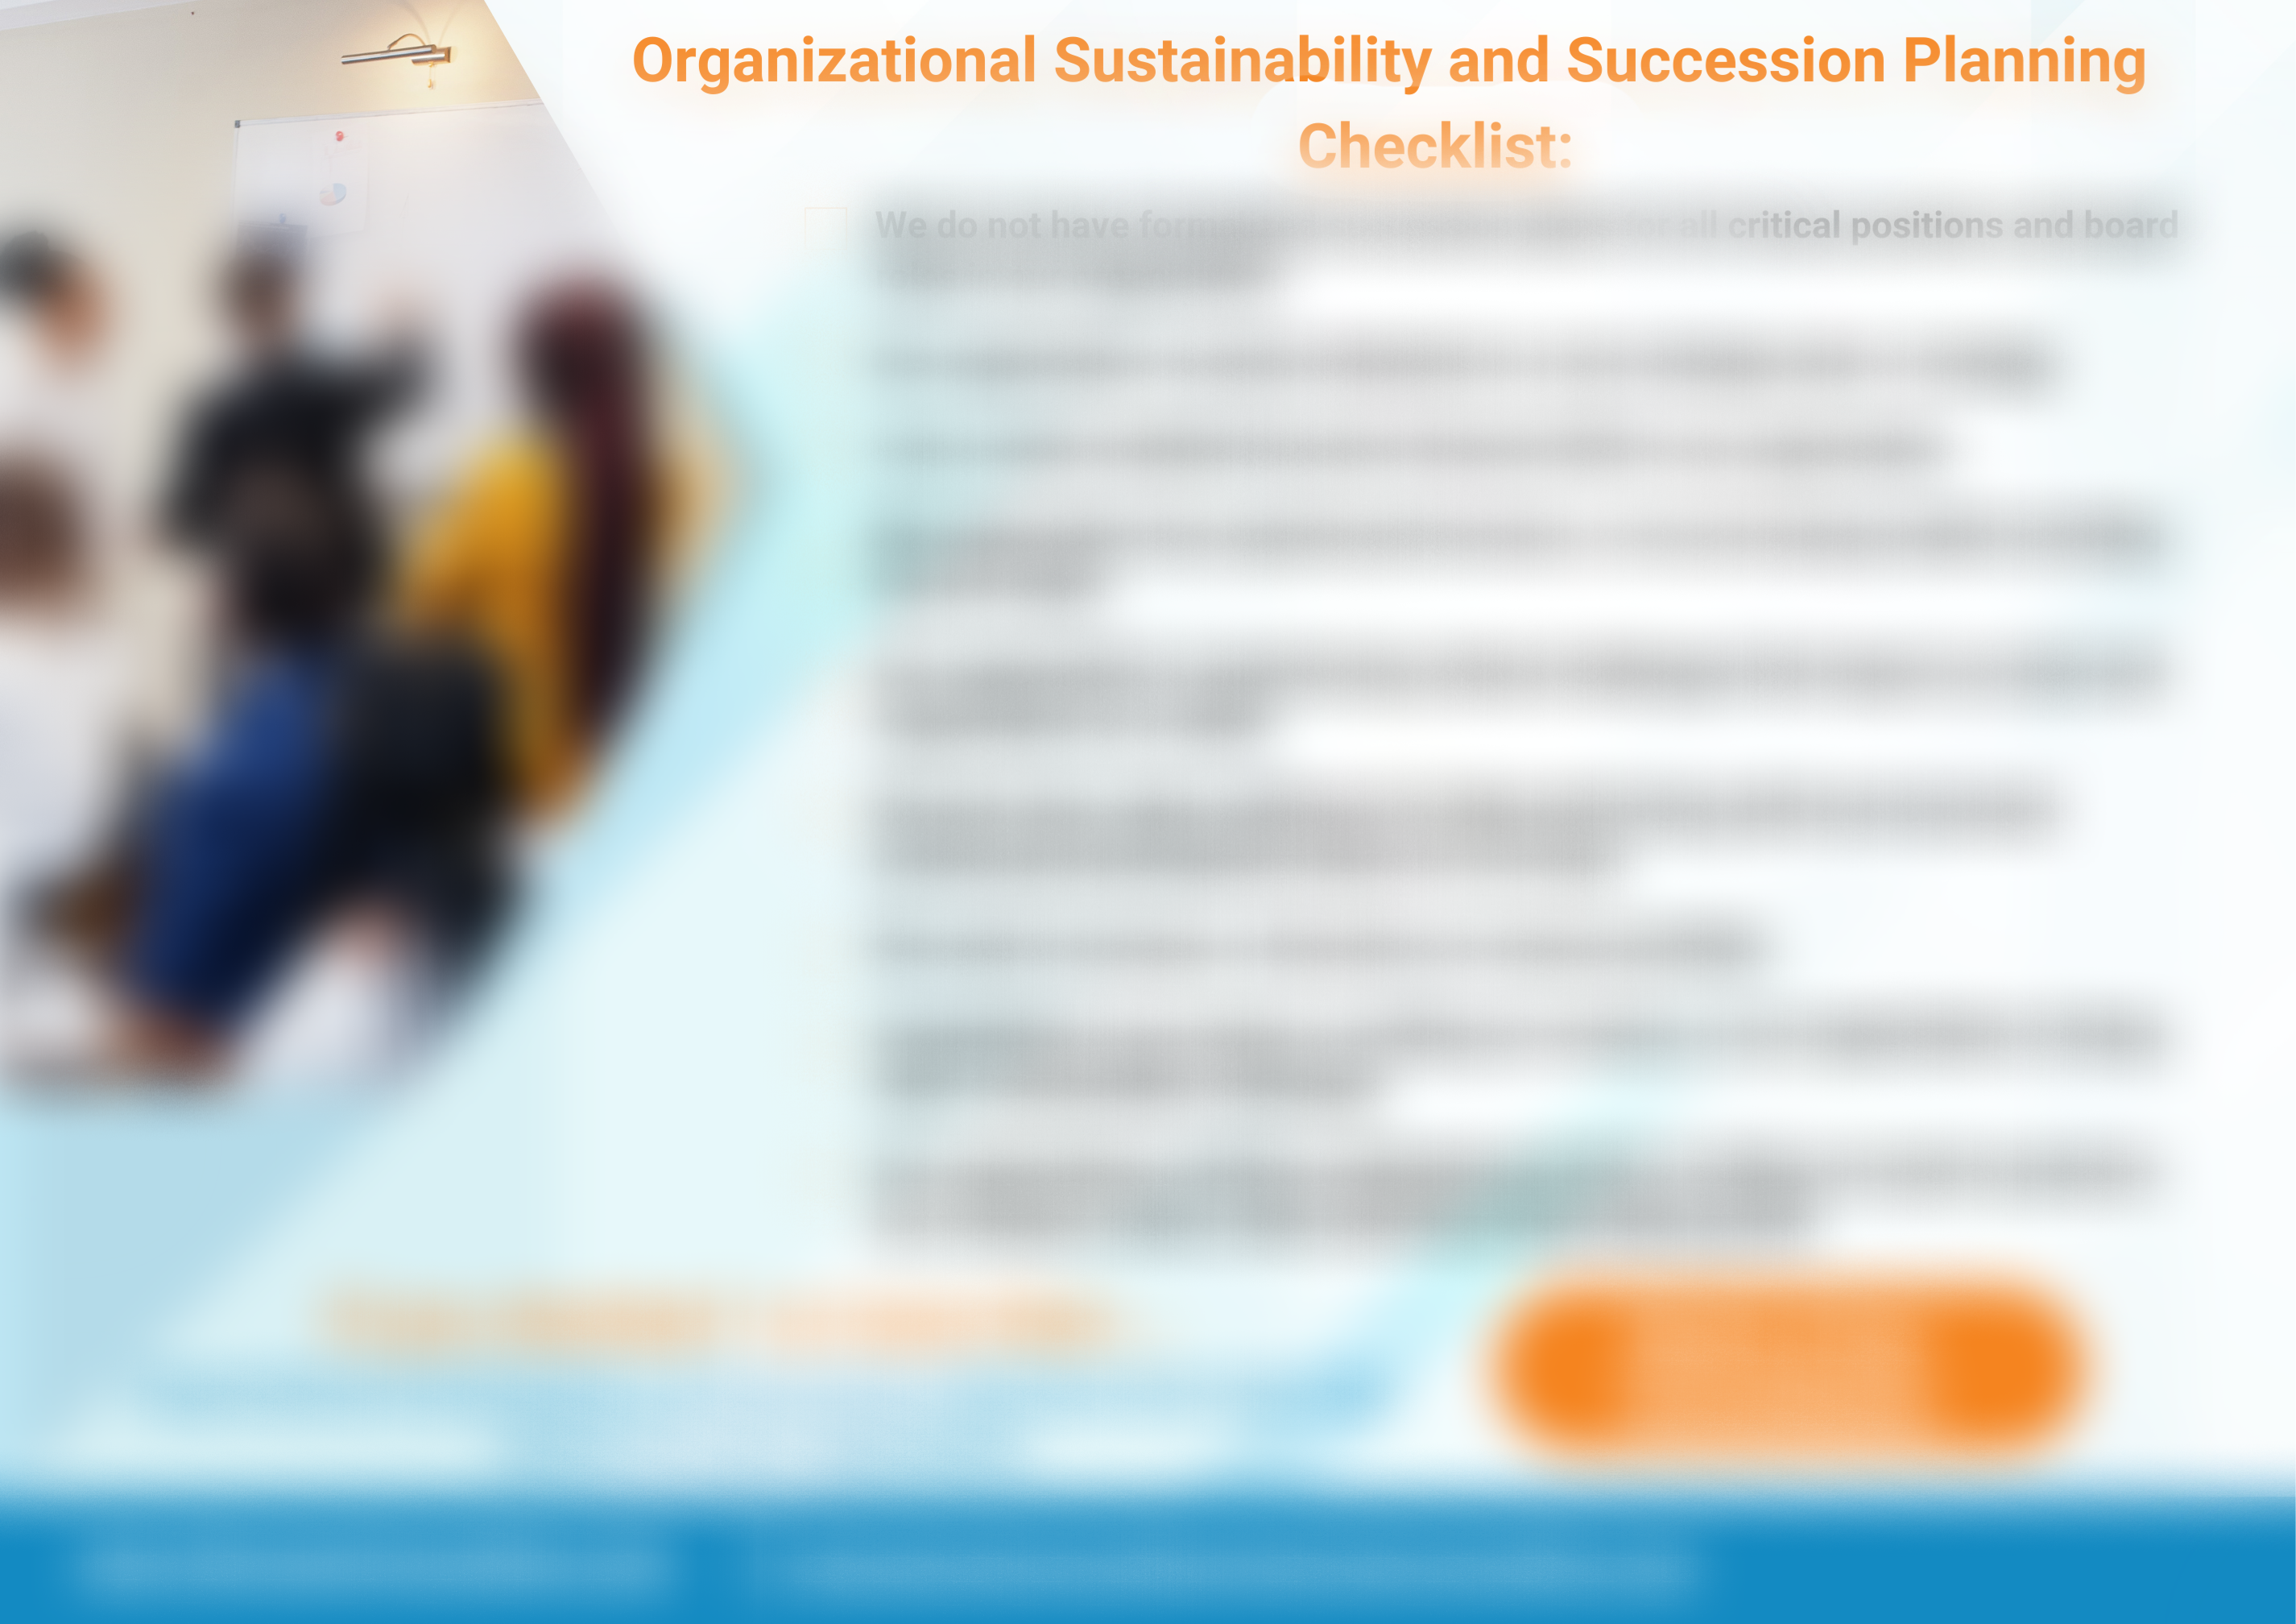 Copy of Organizational Sustainability and Succession Planning Checklist (1)